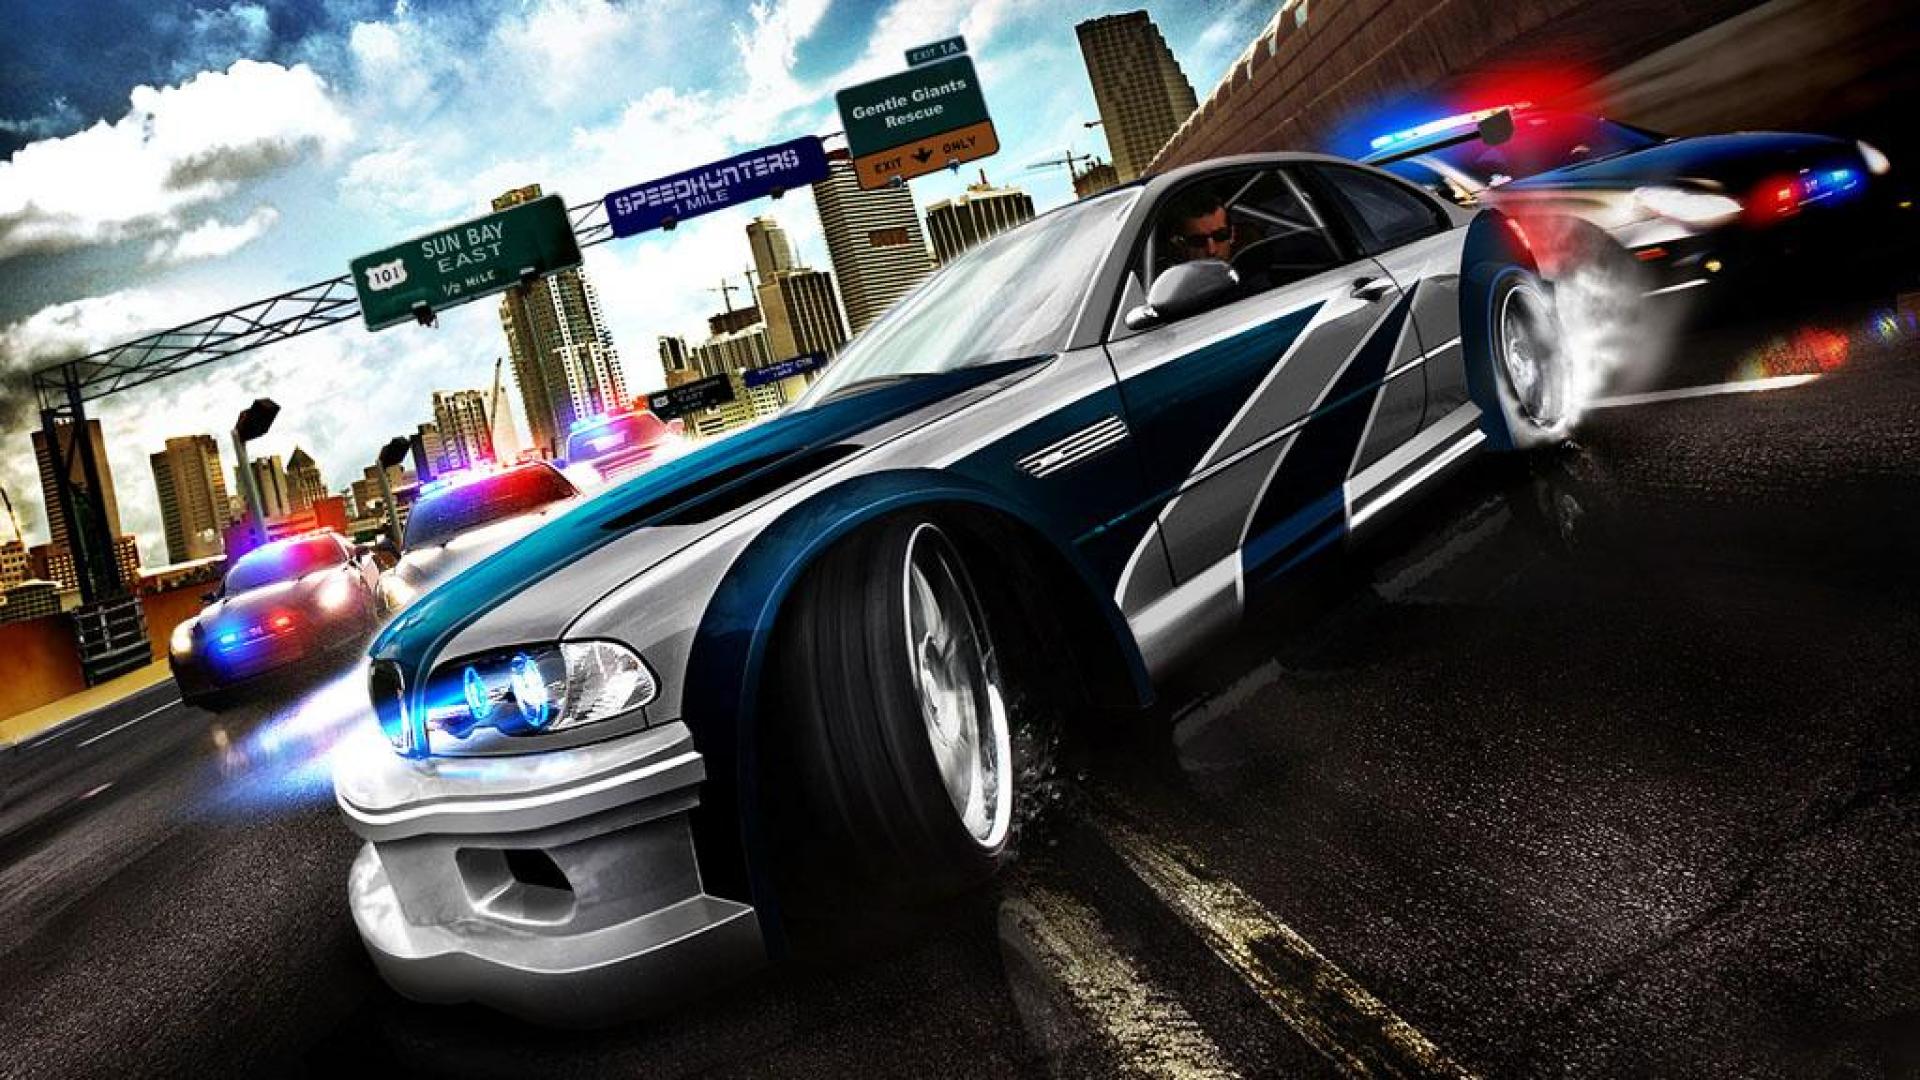 Need For Speed Background Wallpaper High Definition Quality